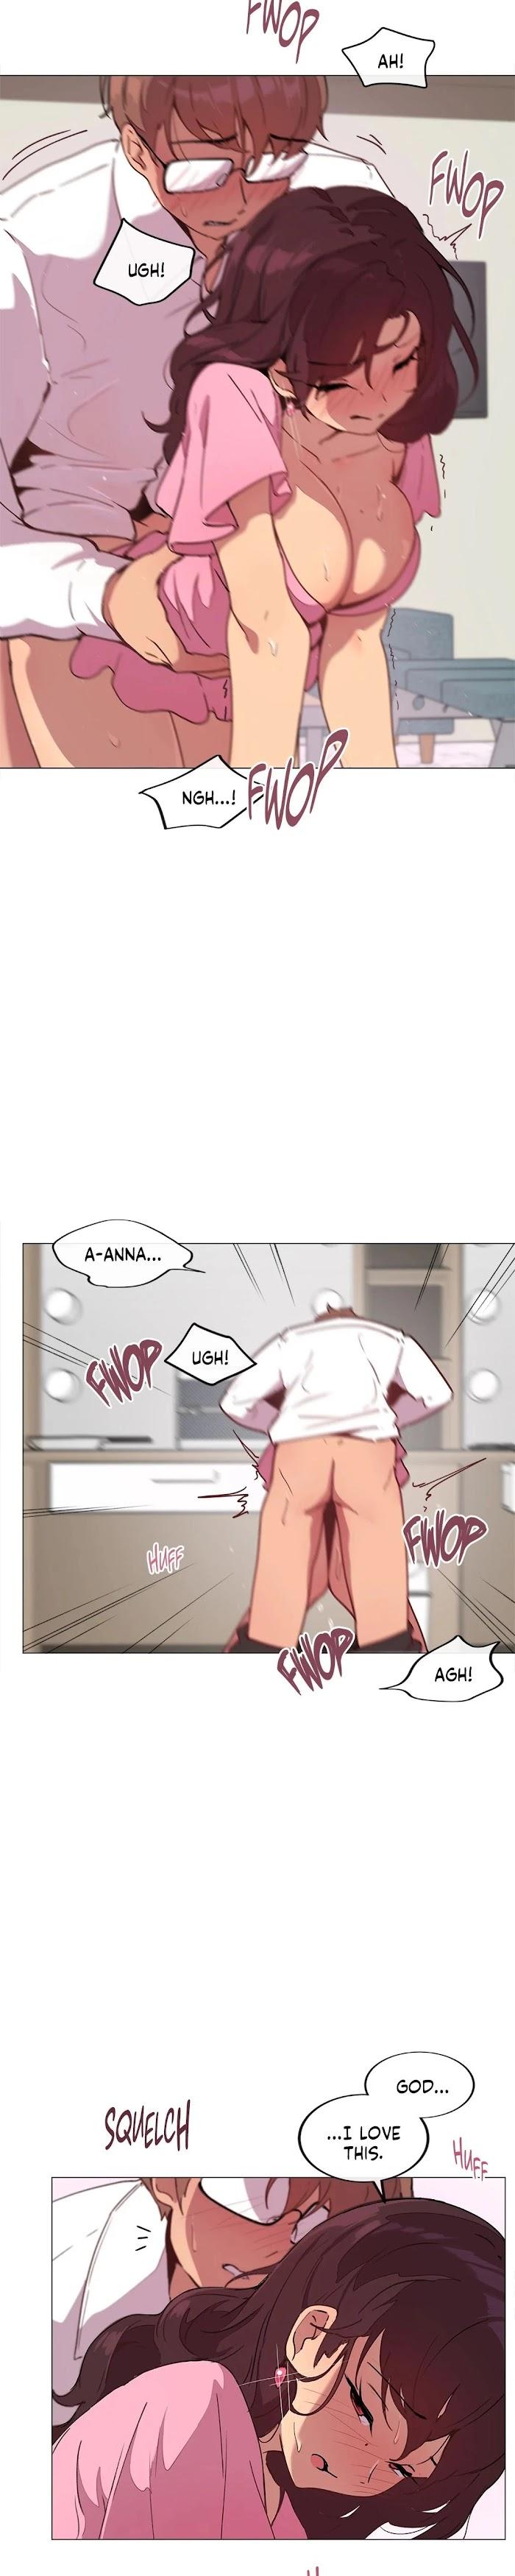 [Dumangoon, 130F] Sexcape Room: Wipe Out Ch.9/9 [English] [Manhwa PDF] Completed 242